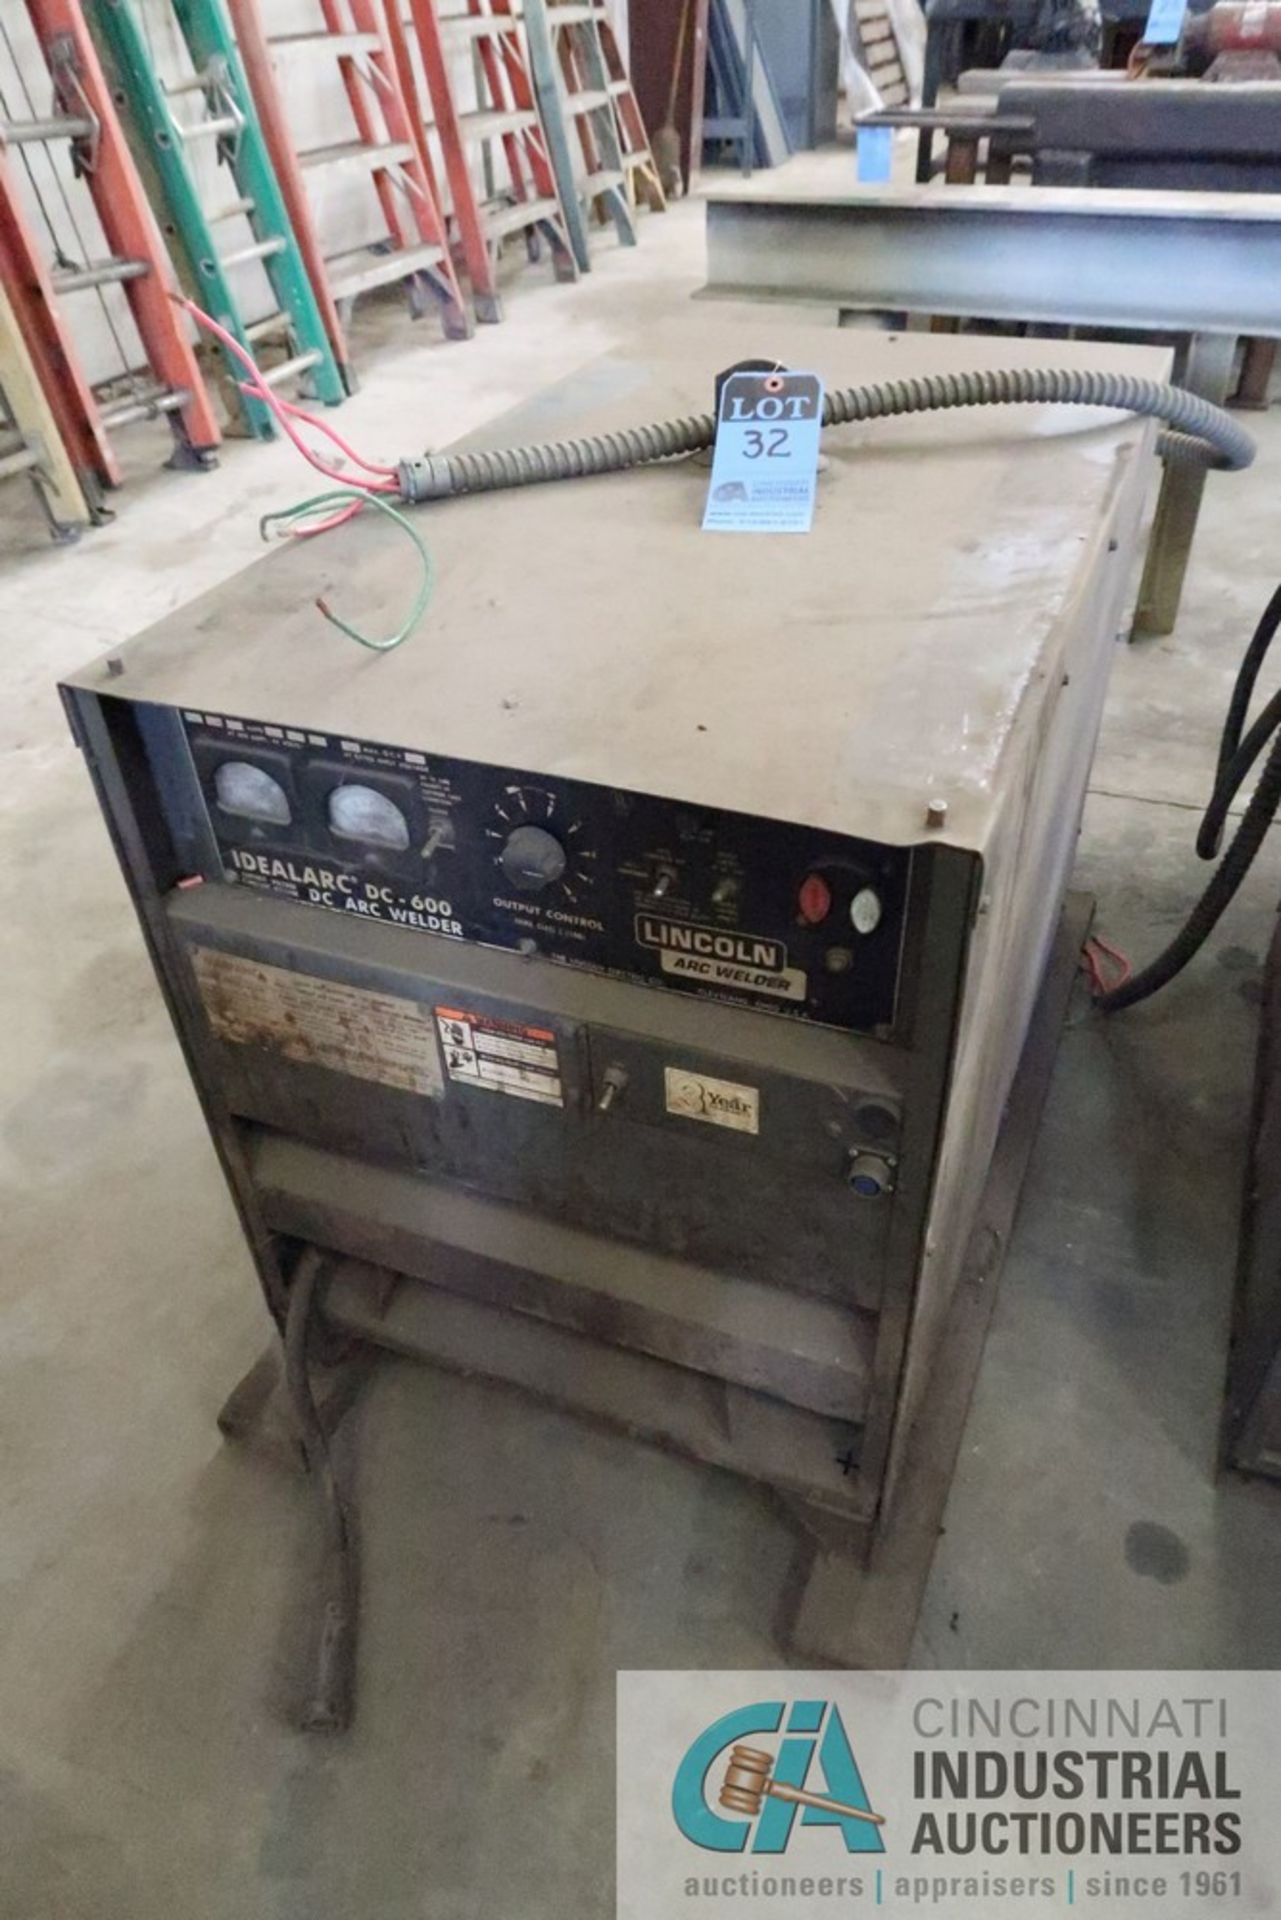 600 AMP LINCOLN ELECTRIC MODEL DC-600 ARC WELDING POWER SOURCE - Image 7 of 7